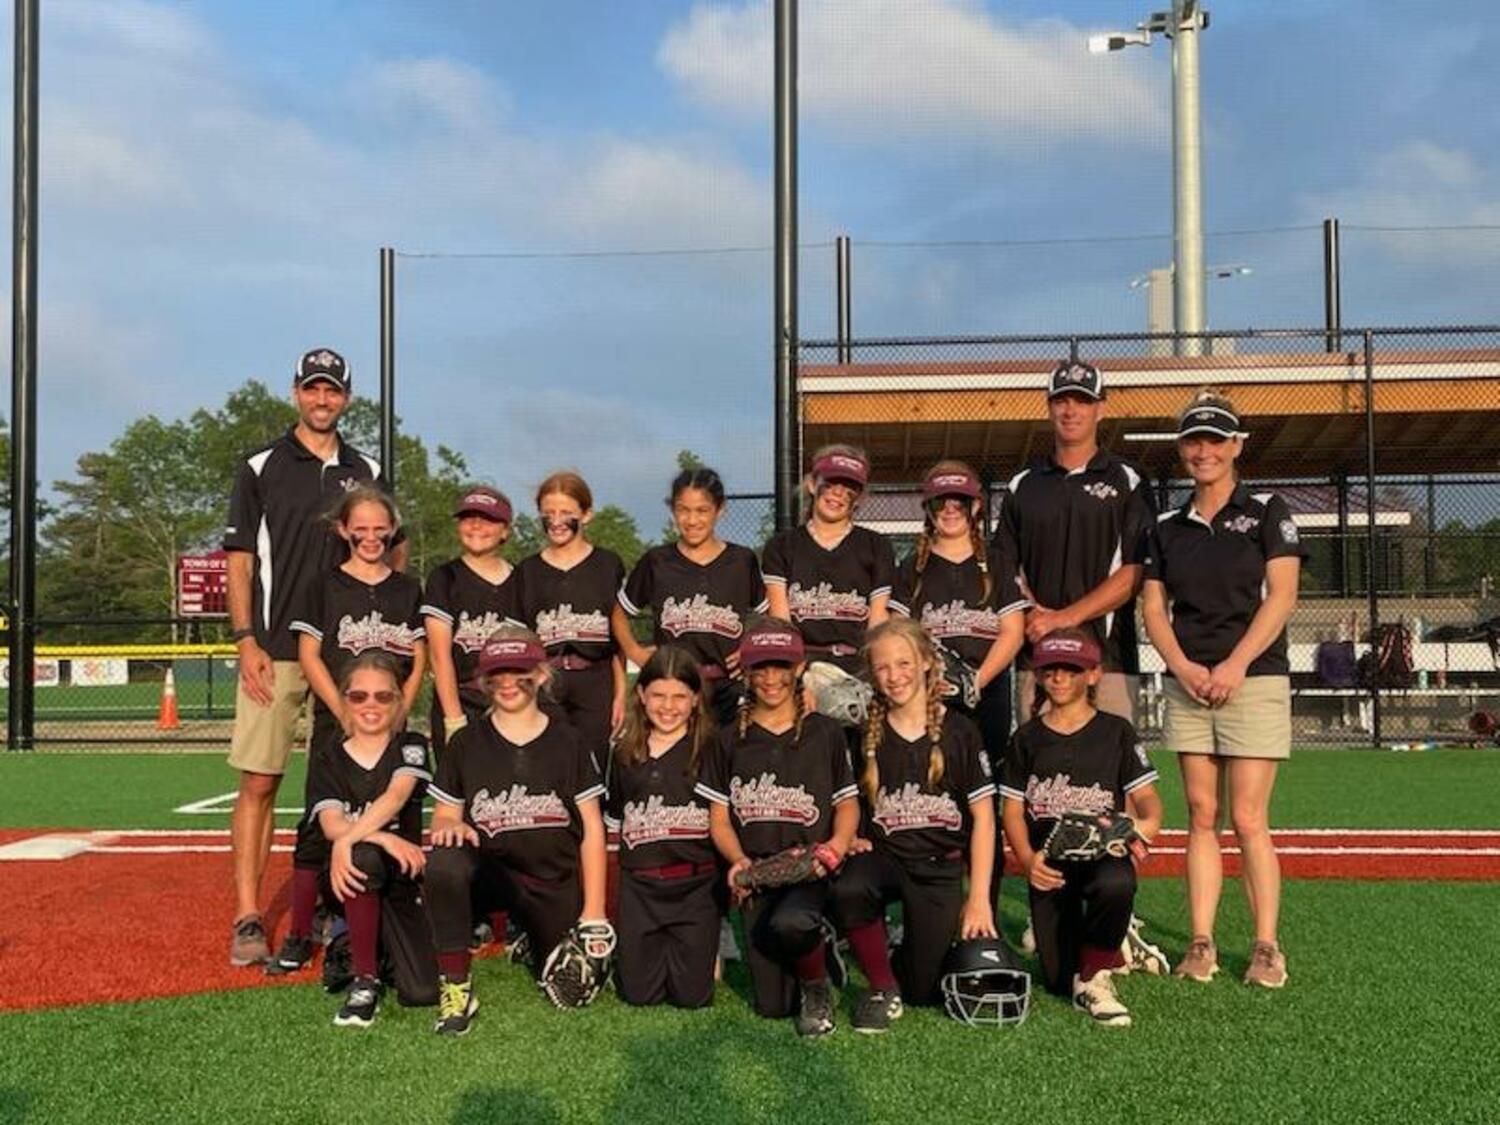 This year’s 10U softball All-Stars included Madeline Abran, Addison Cinelli, Mia Coppola, Avery Dalene, Ava Duryea-Kelly, Audrey Hildreth, Siena Kinney, Ann Peterson, Sage Quackenbush, Evelyn Sanders, Sophia Schuerlein and Charlotte Vickers. The team was managed by John Cinelli who was assisted by Erin Abran and Sean Kinney.